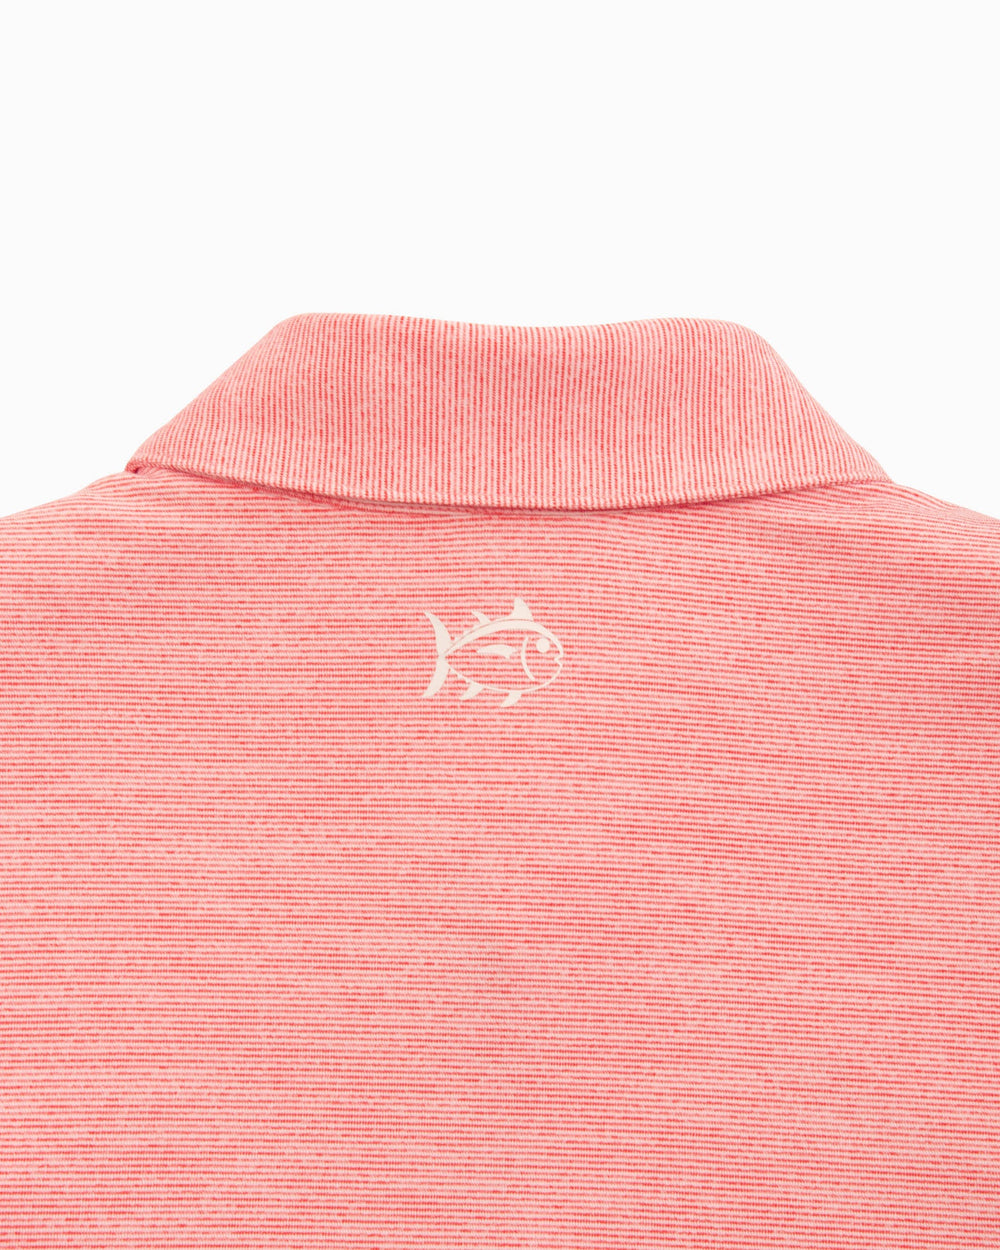 The yoke of the NC State Driver Spacedye Polo Shirt by Southern Tide - Varsity Red